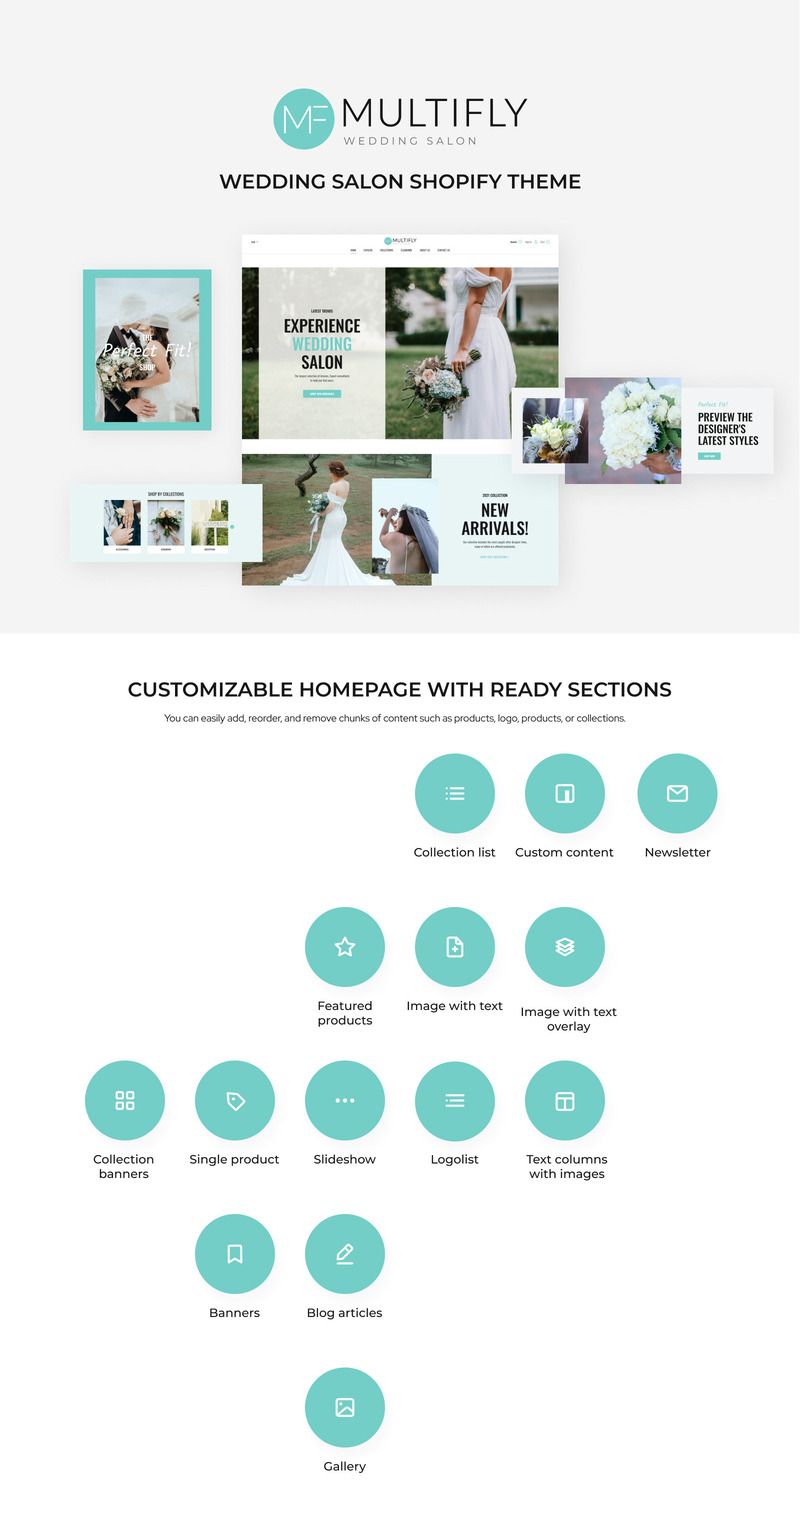 Multifly Wedding Salon Shopify Theme - Features Image 1